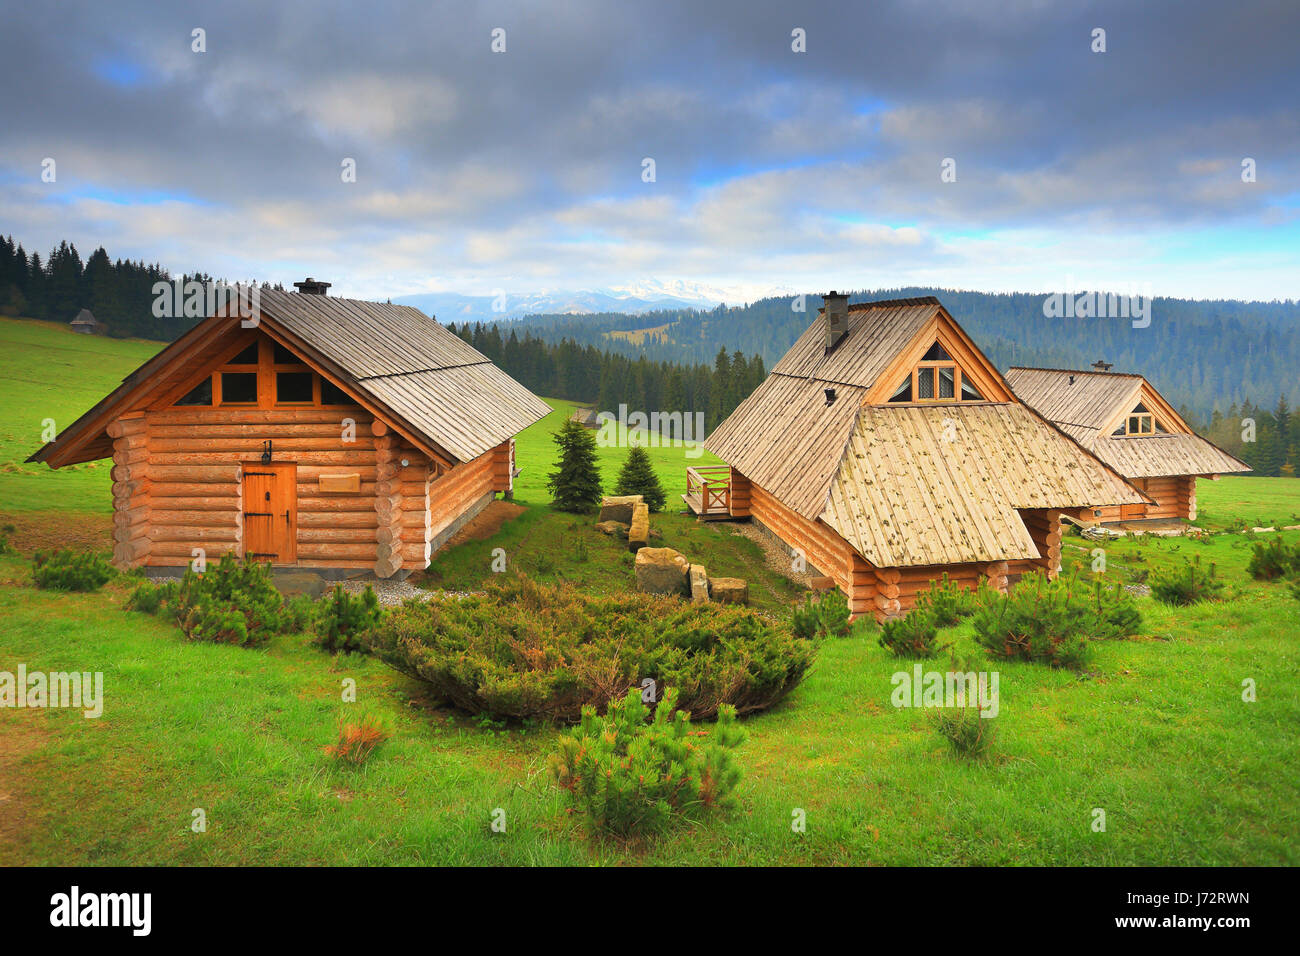 Ecological wooden houses on mounain hills. Wooden hotel on a sunny day. Beautiful place for rest. Morning landscape with green grass. Stock Photo